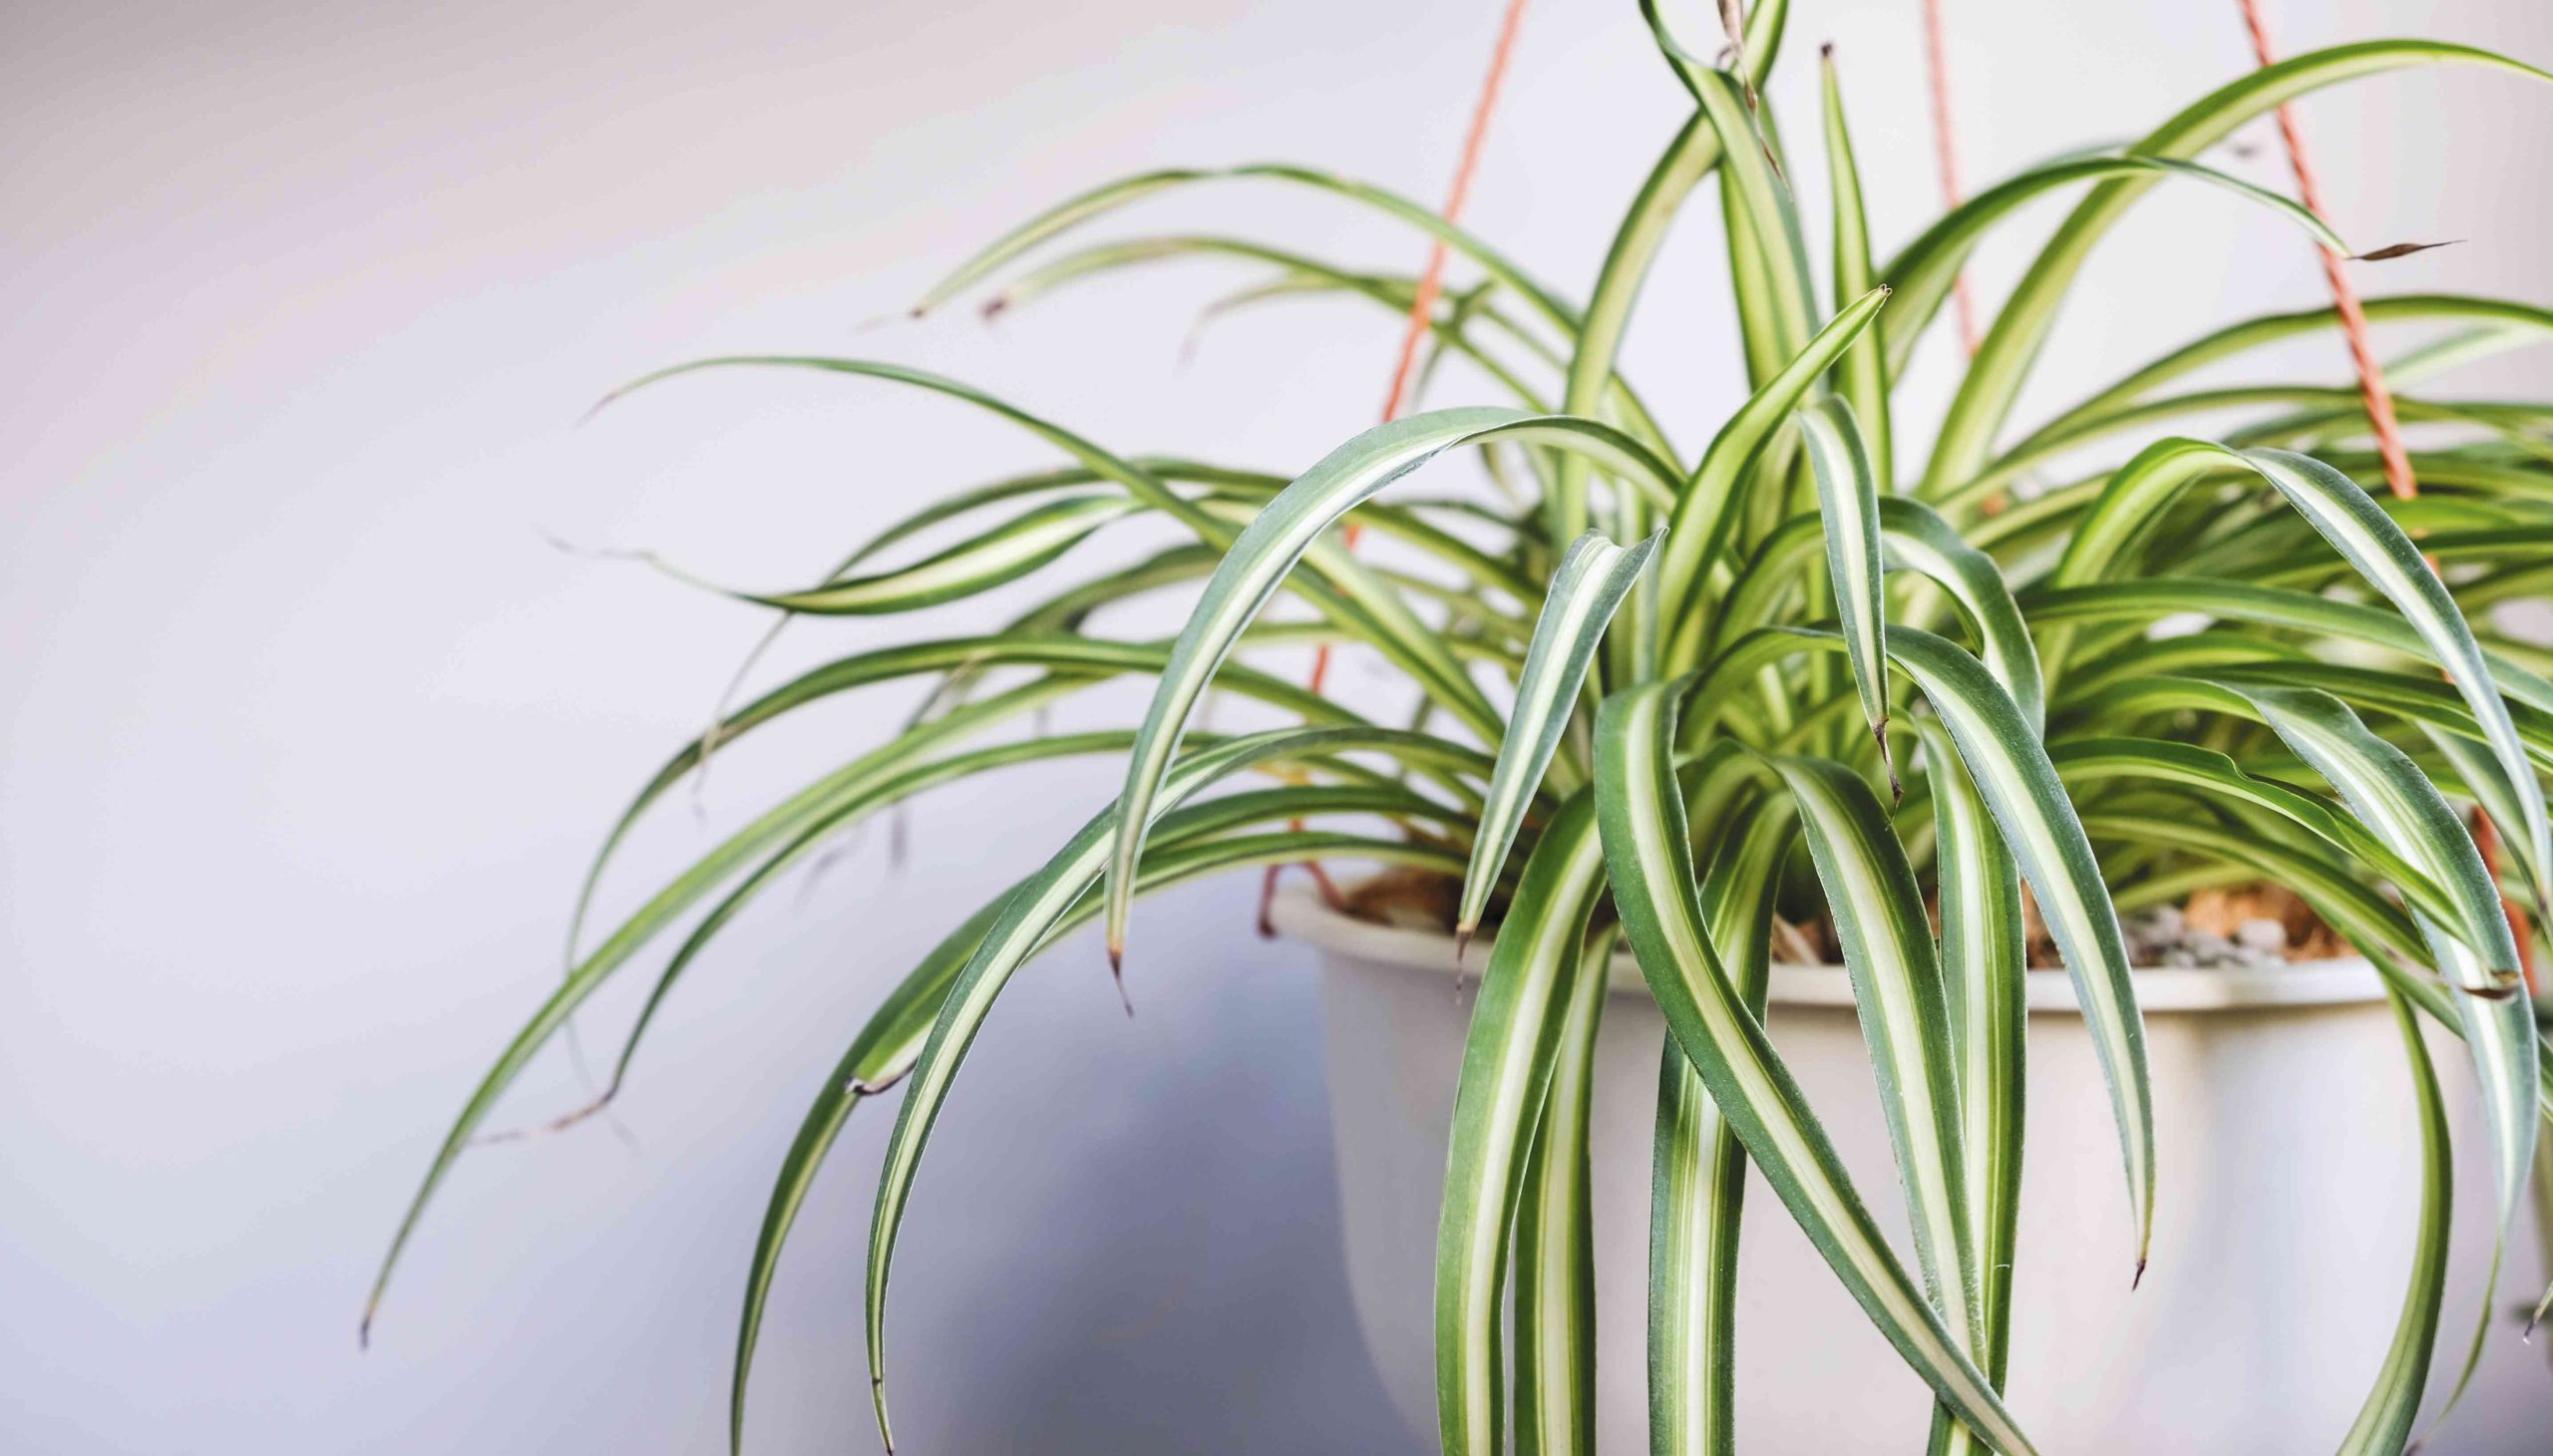 What looks similar to a spider plant?